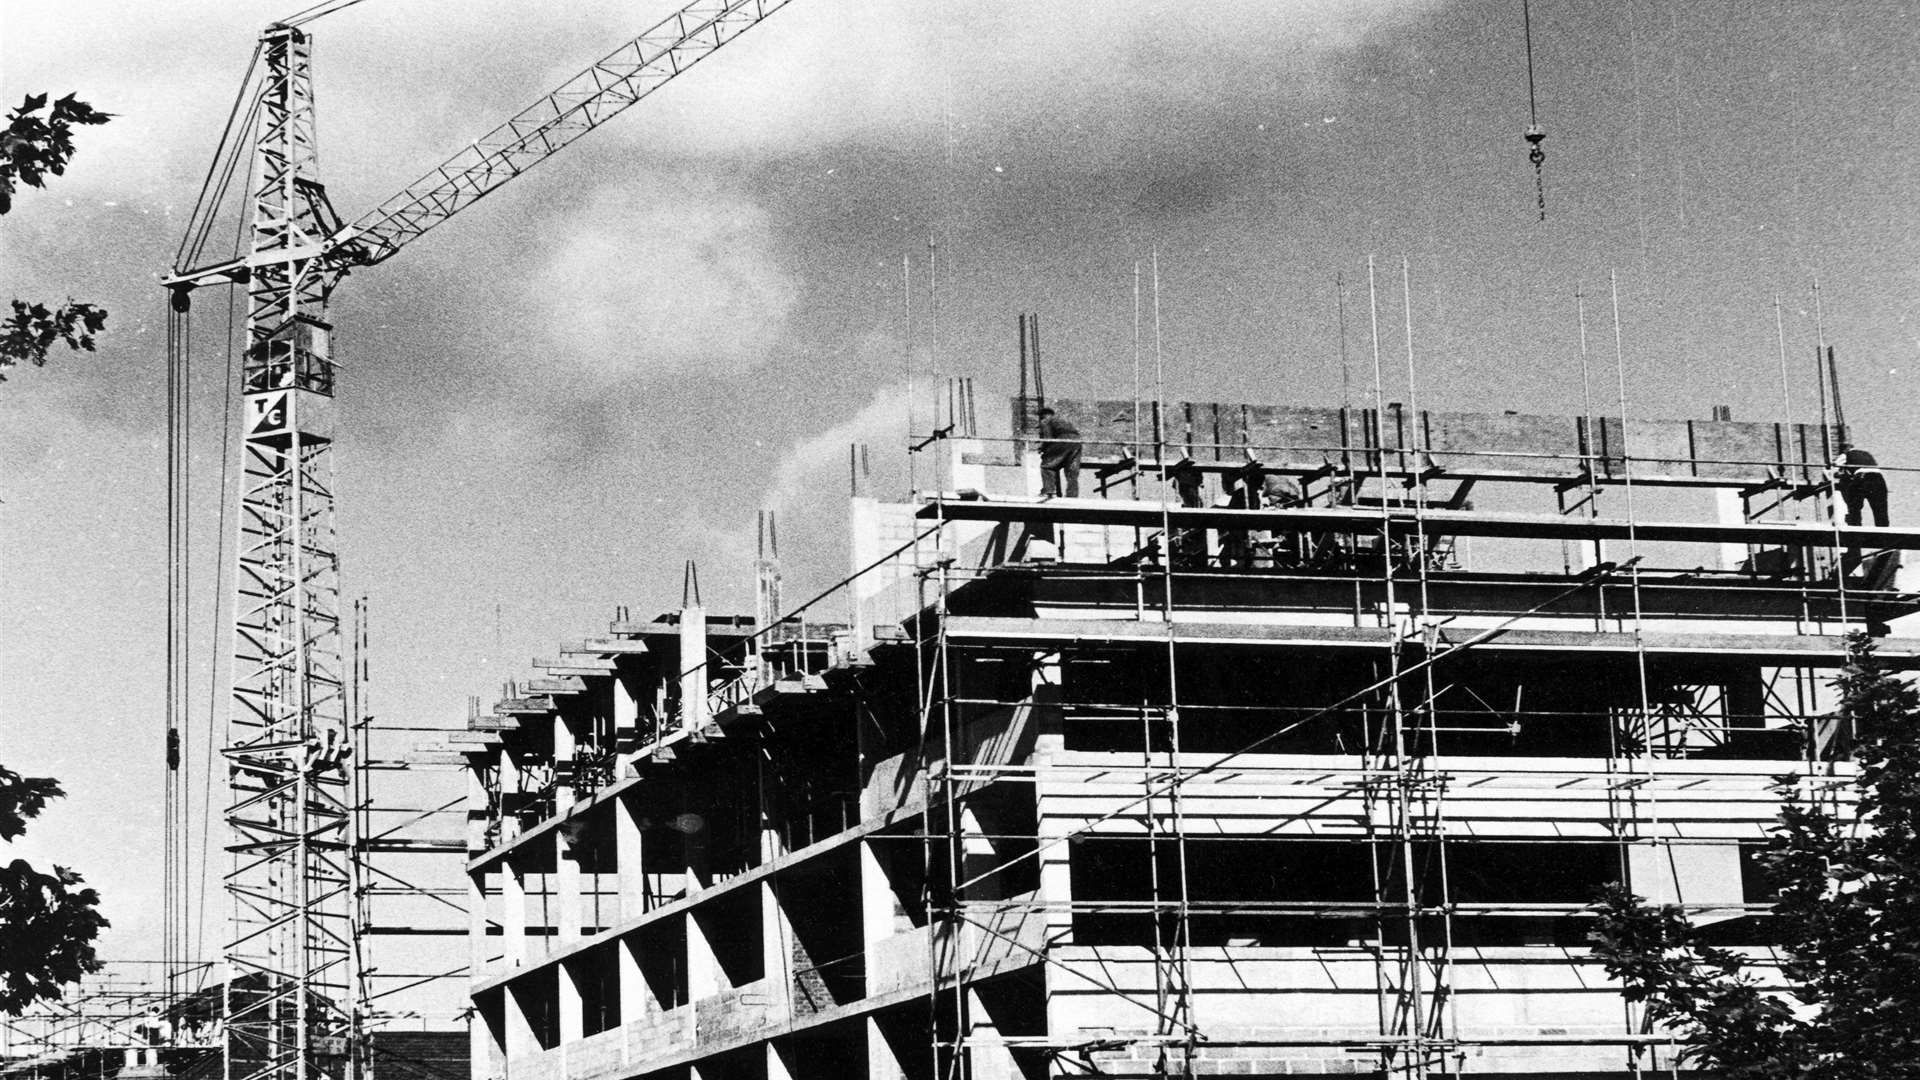 The police station under construction in the 1960s.